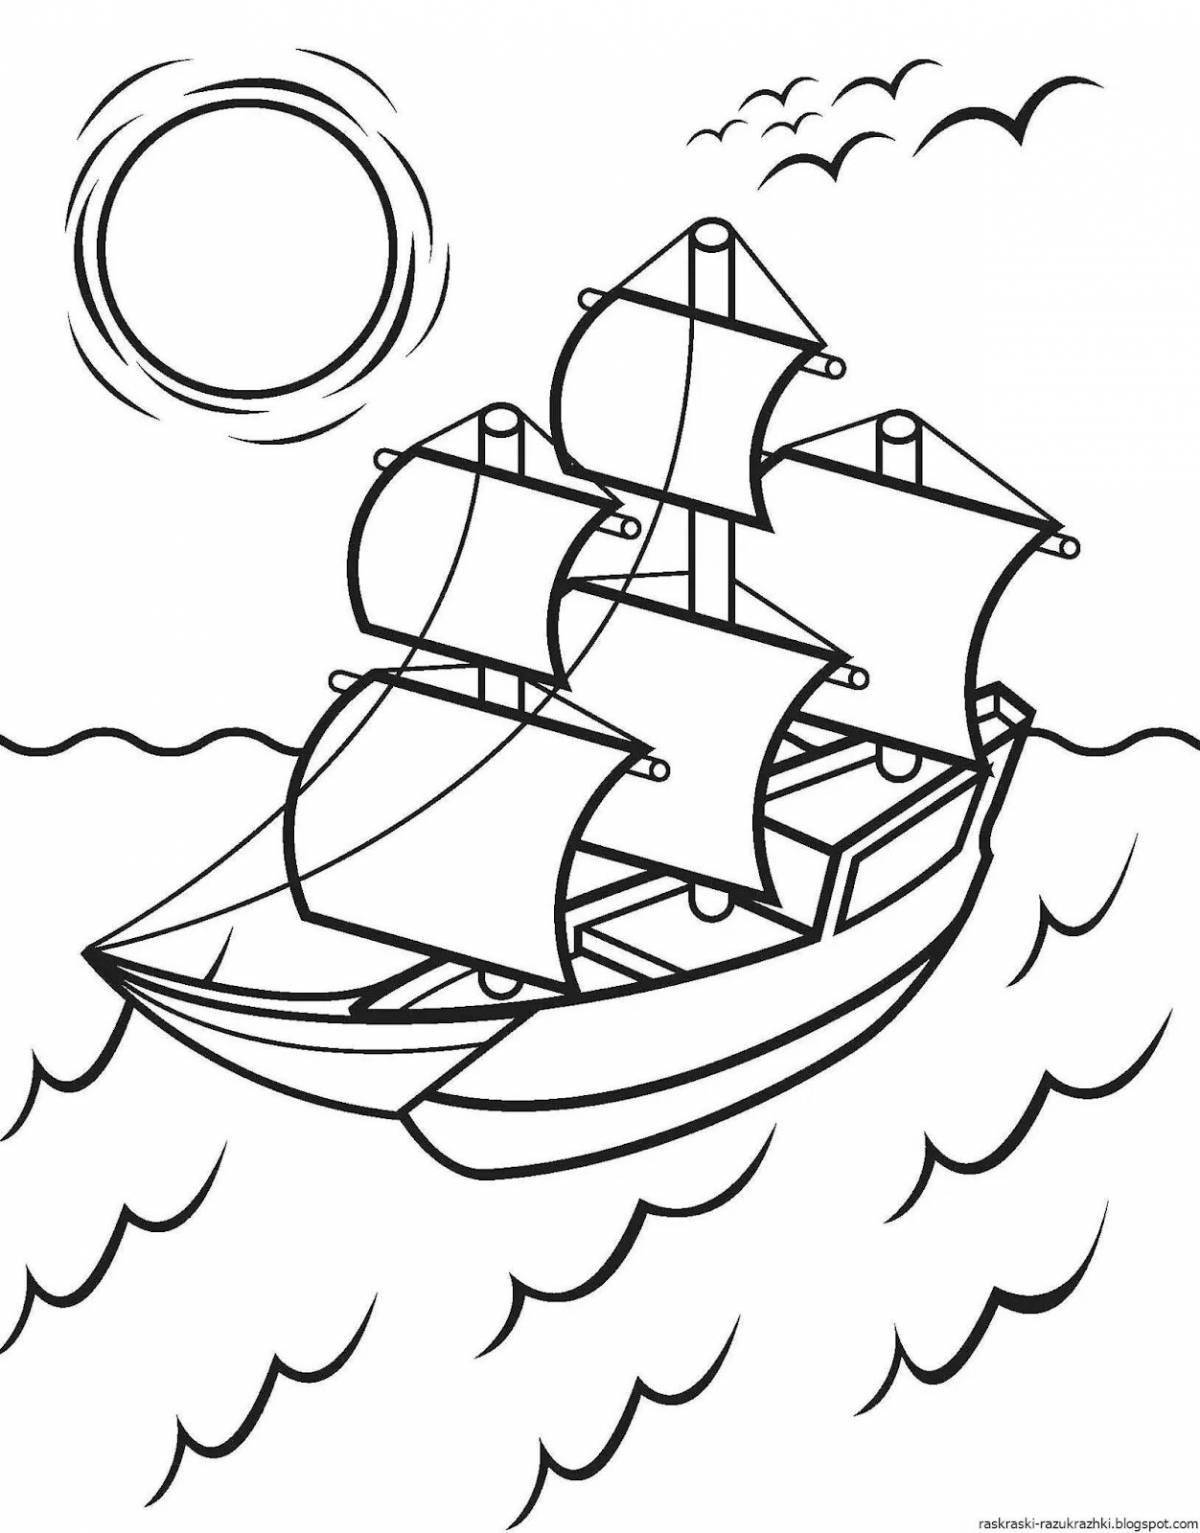 Amazing ship coloring book for 5-6 year olds